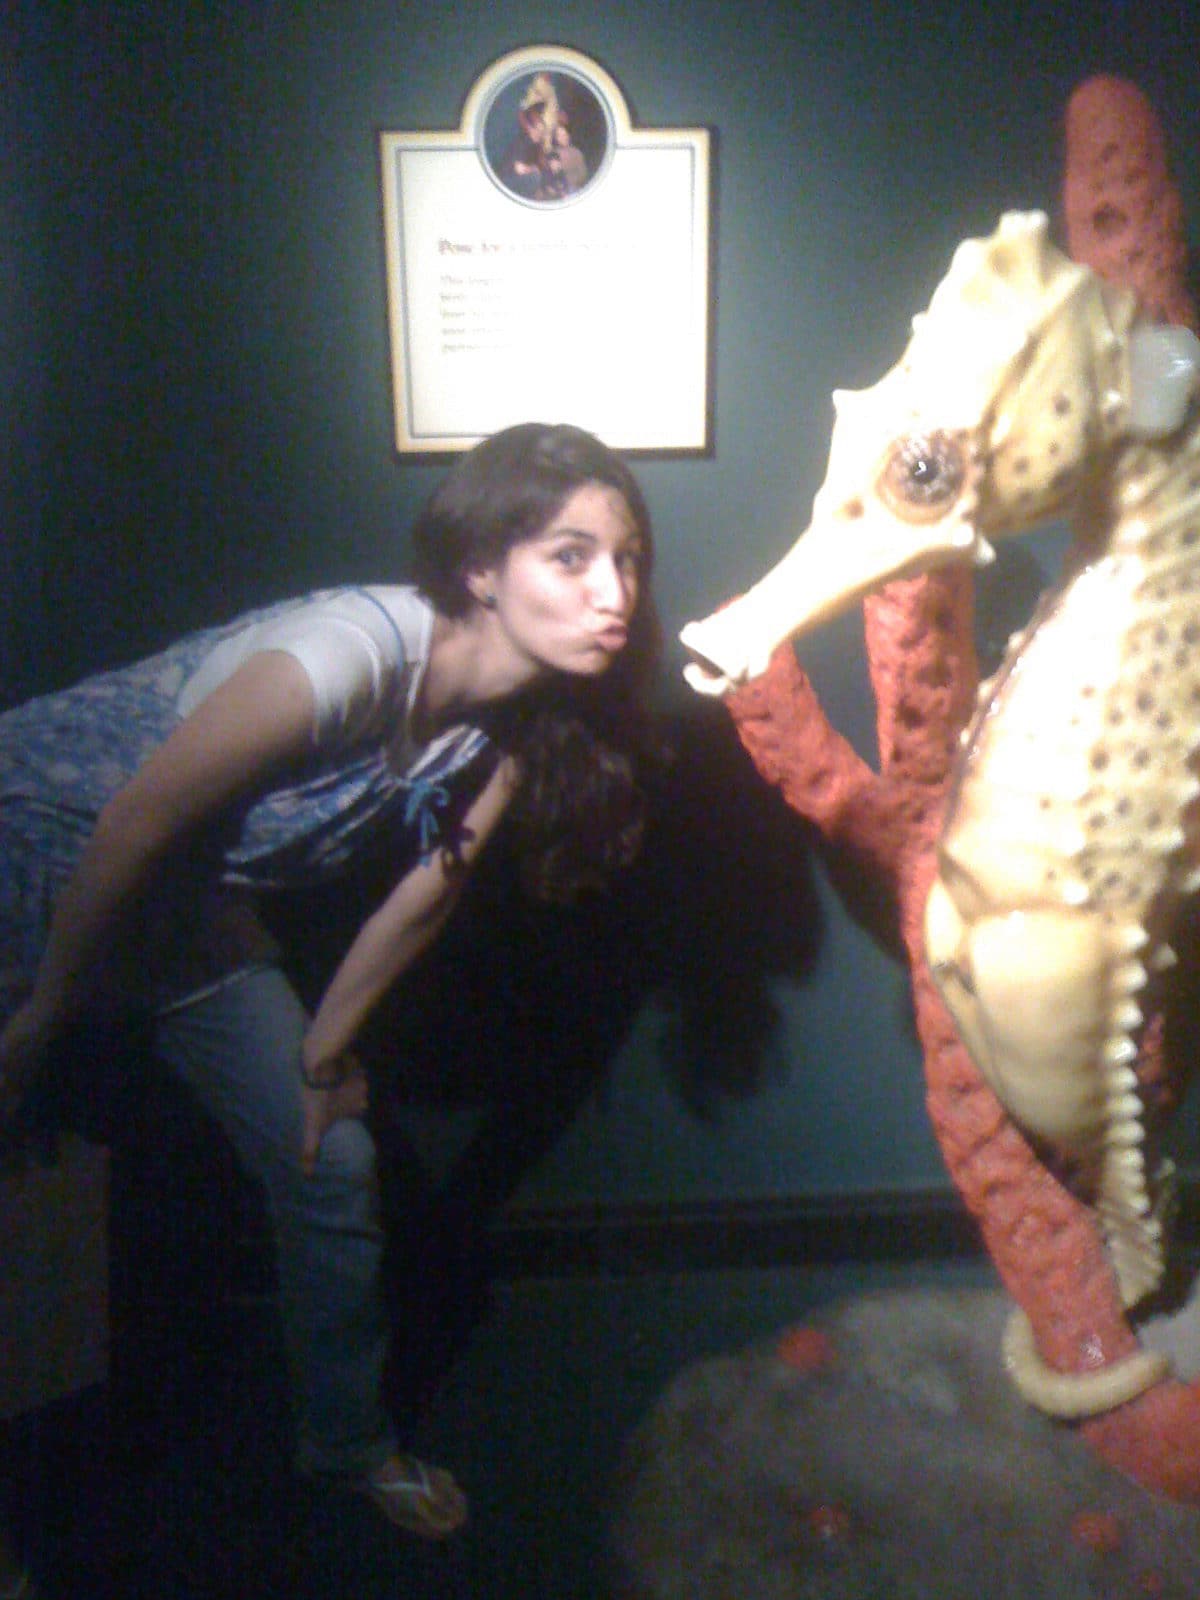 mariam getting too friendly with the sea horses